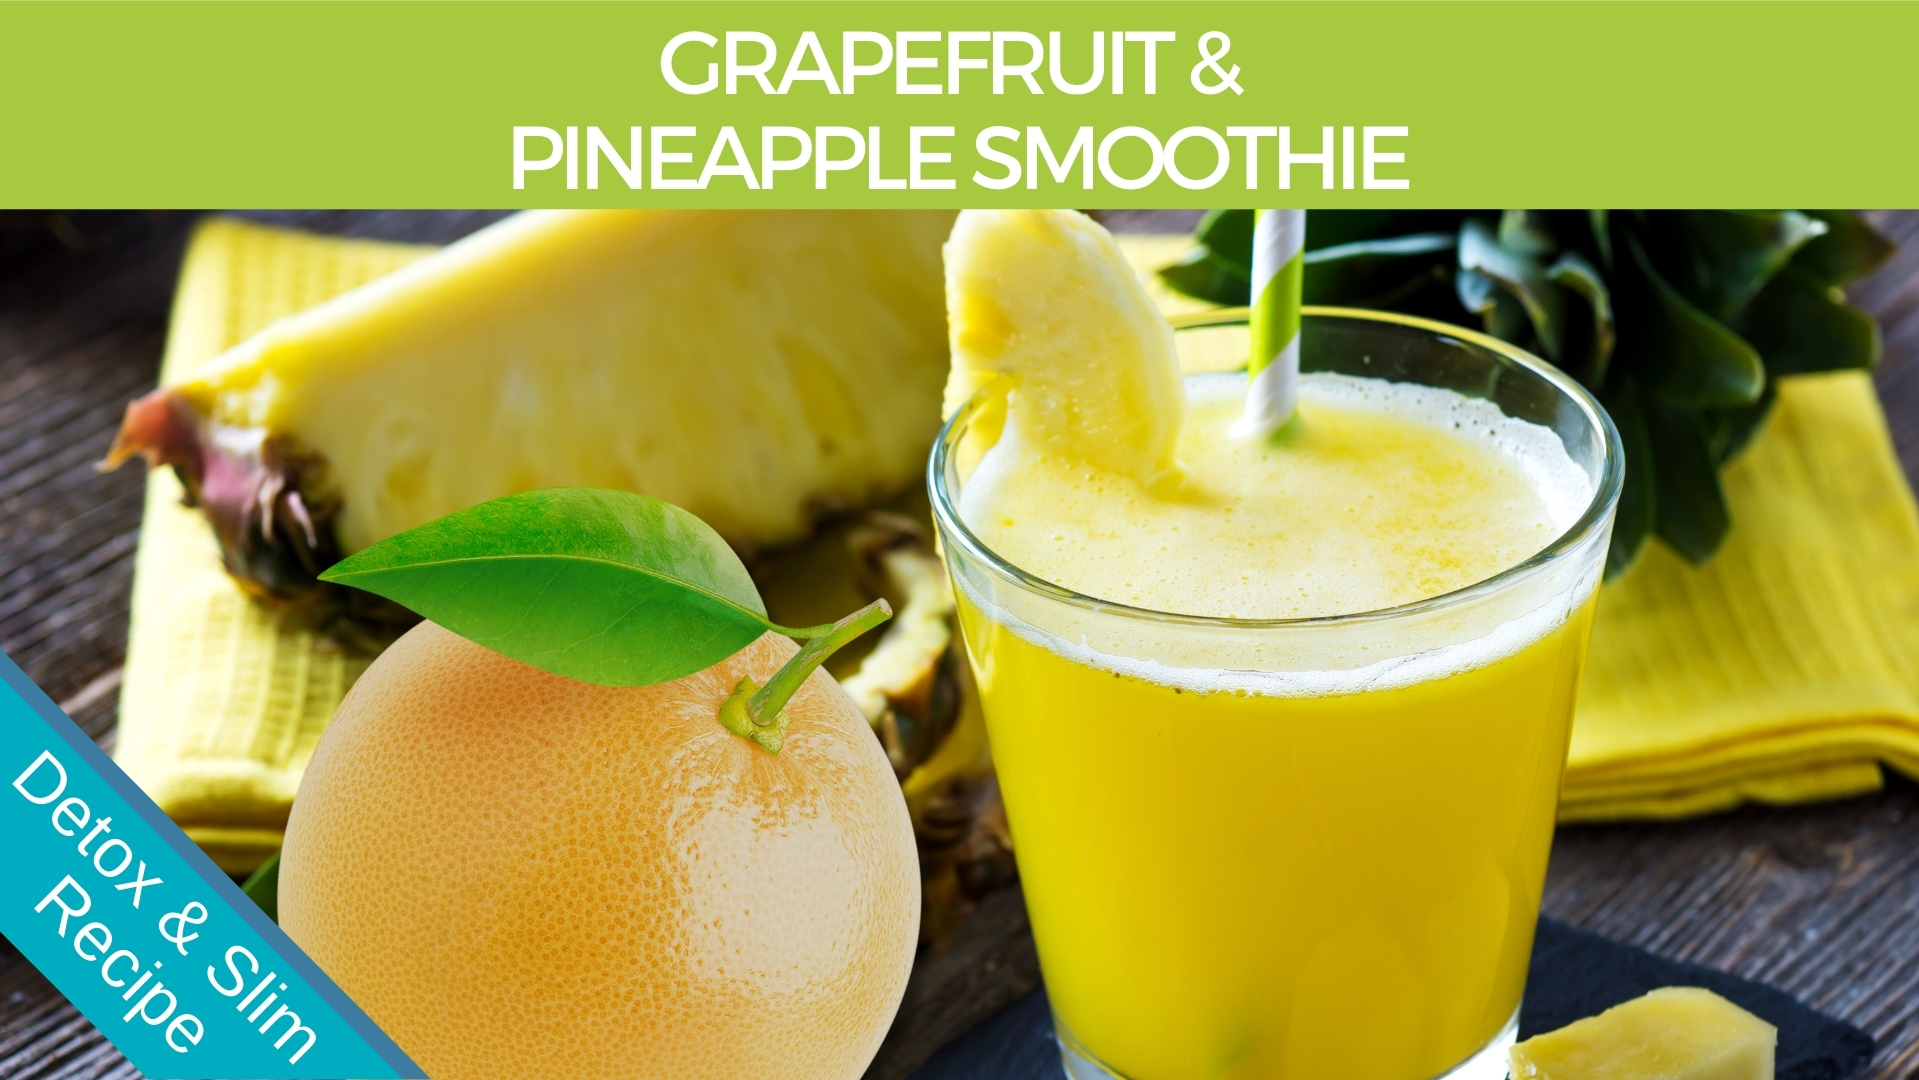 Grapefruit and Pineapple Smoothie